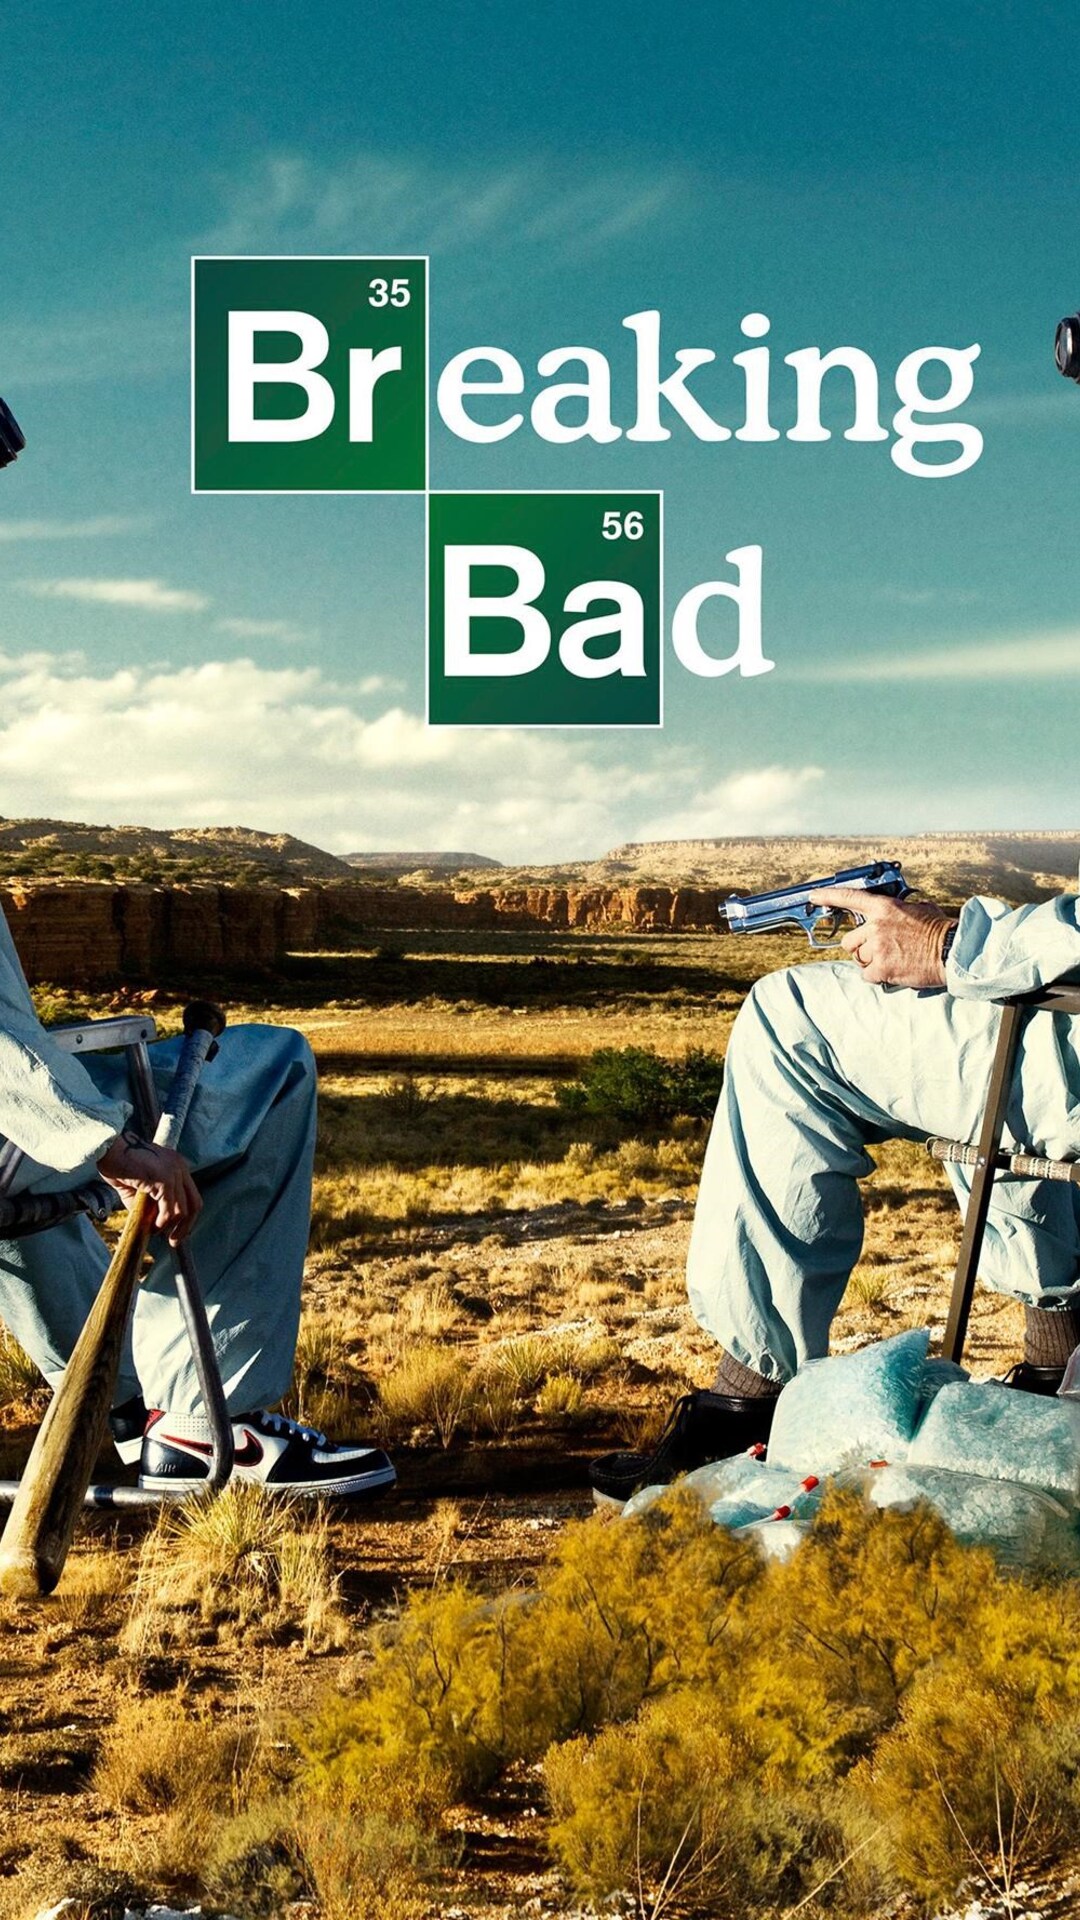 1080x1920 Breaking Bad Tv Show Iphone 7,6s,6 Plus, Pixel xl ,One Plus 3,3t,5  HD 4k Wallpapers, Images, Backgrounds, Photos and Pictures